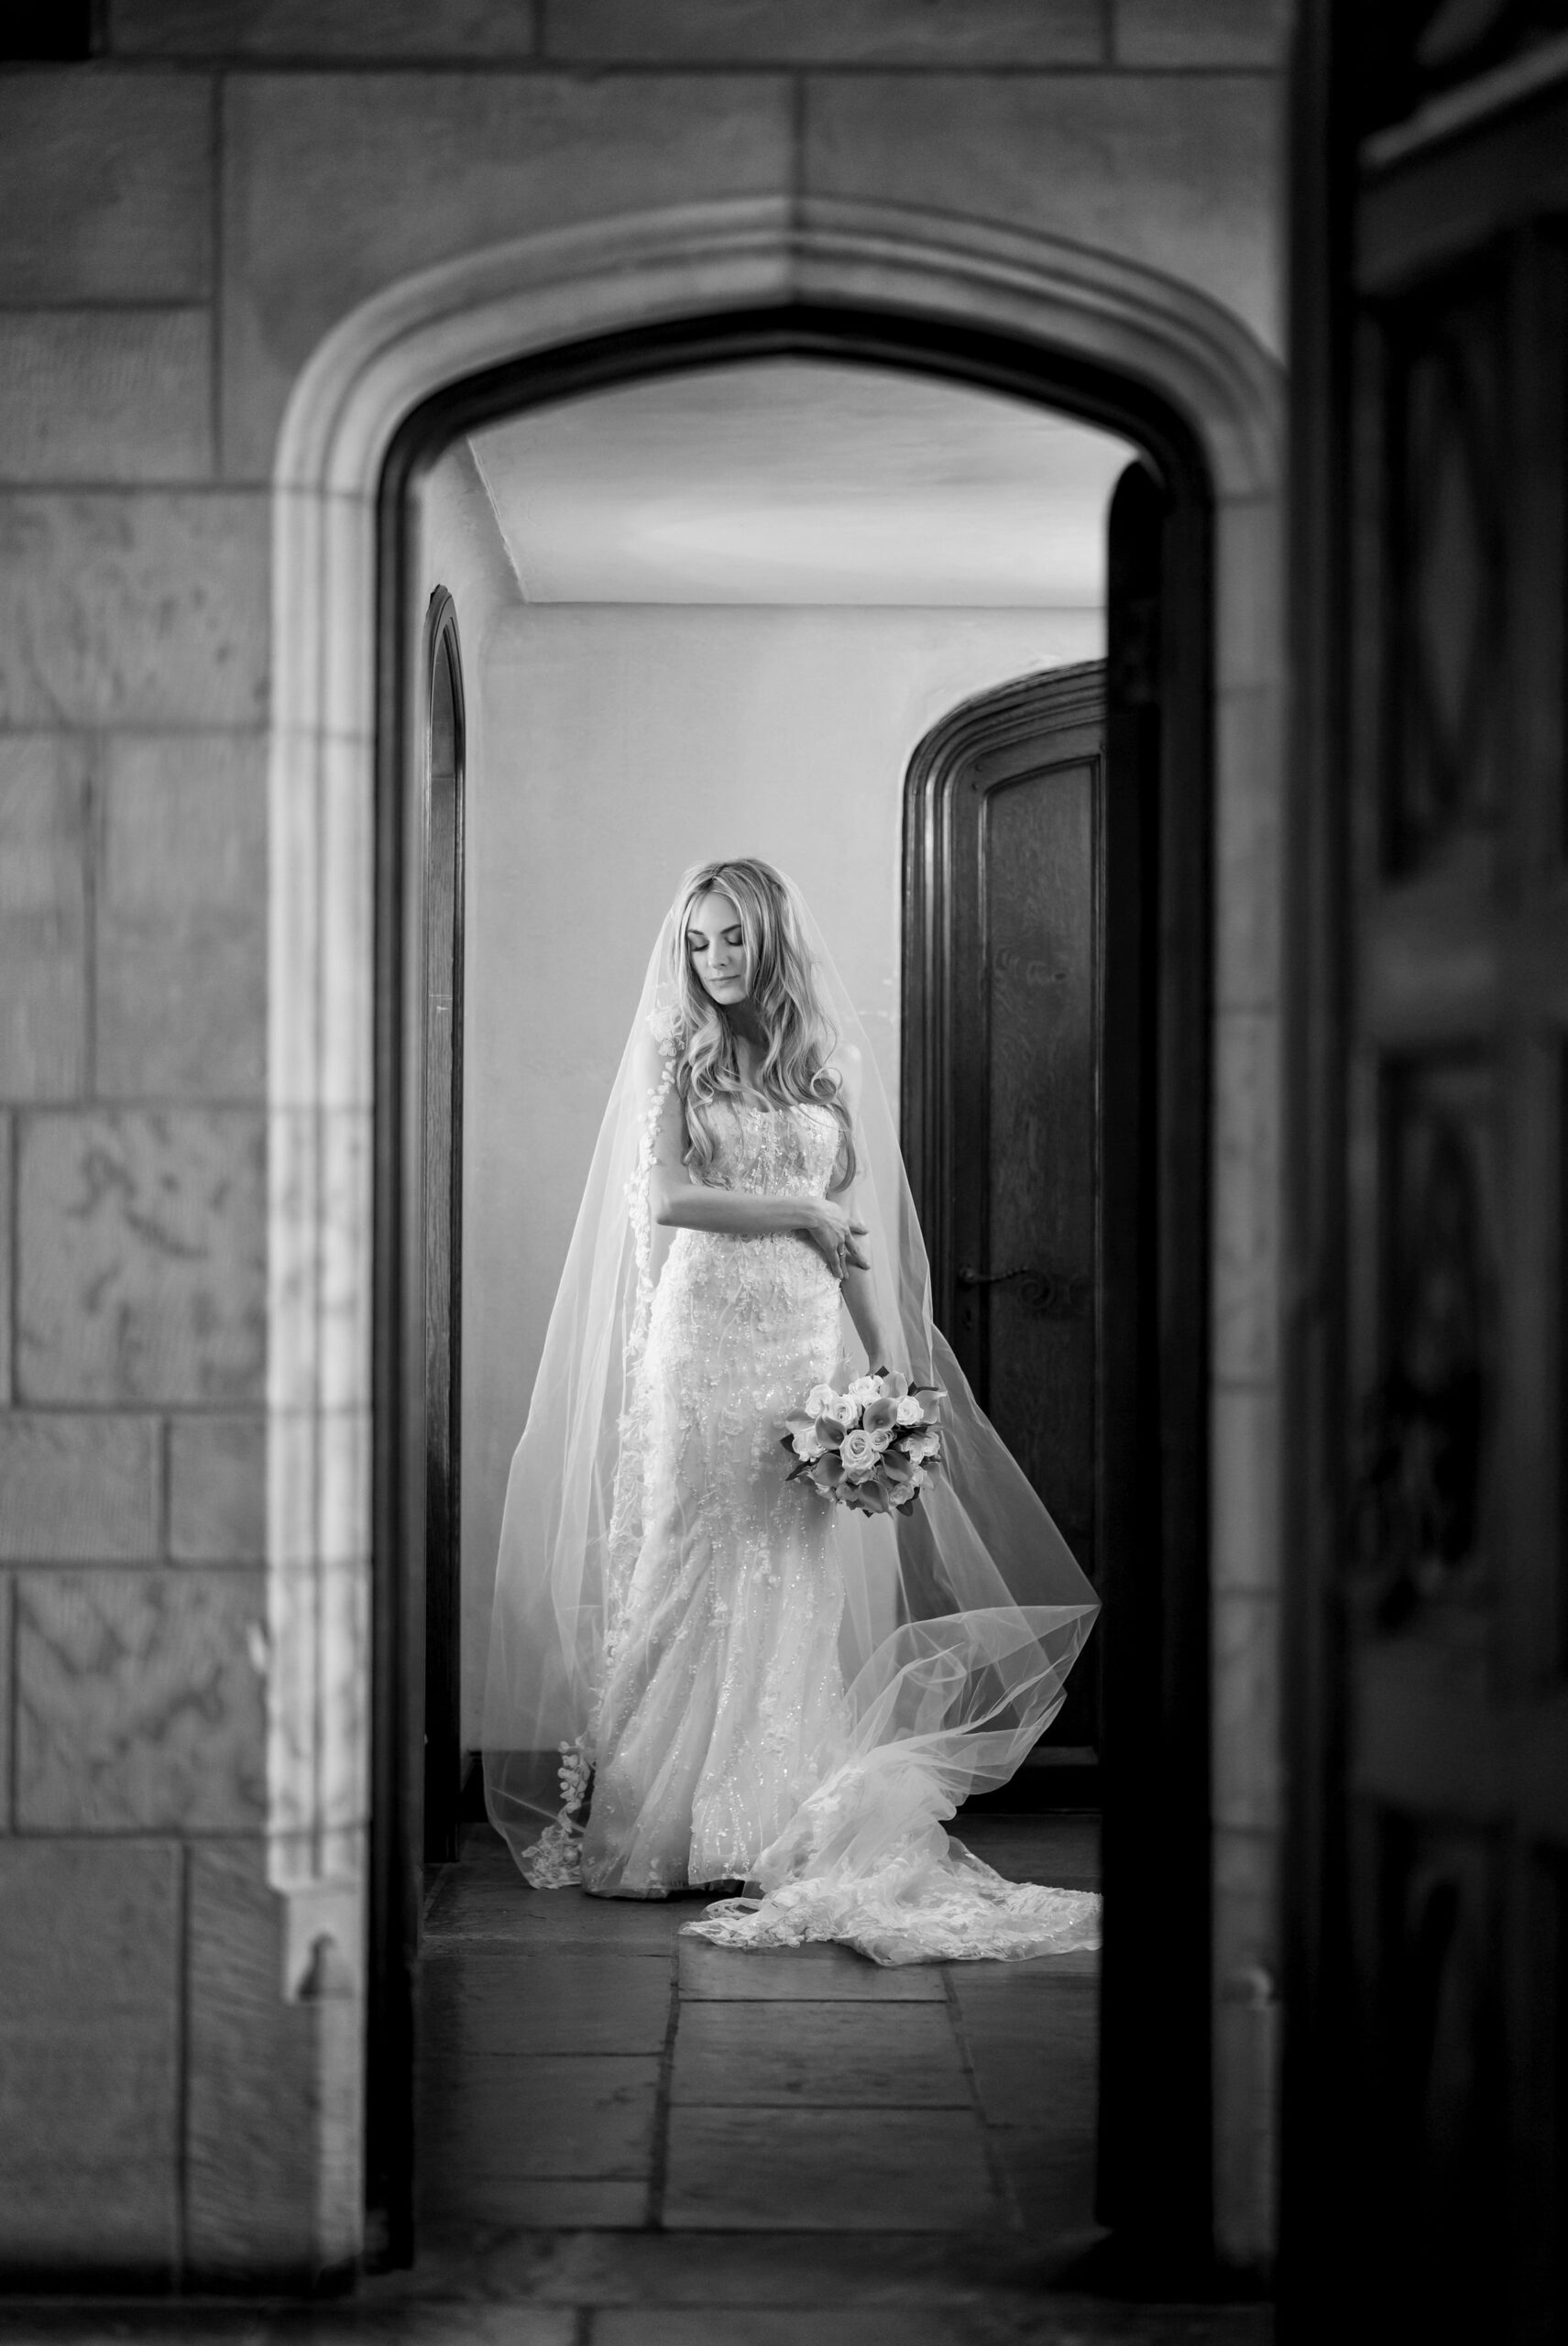 A bride looks at herself in a mirror while standing in an archway at her Meadowbrook wedding reception.  